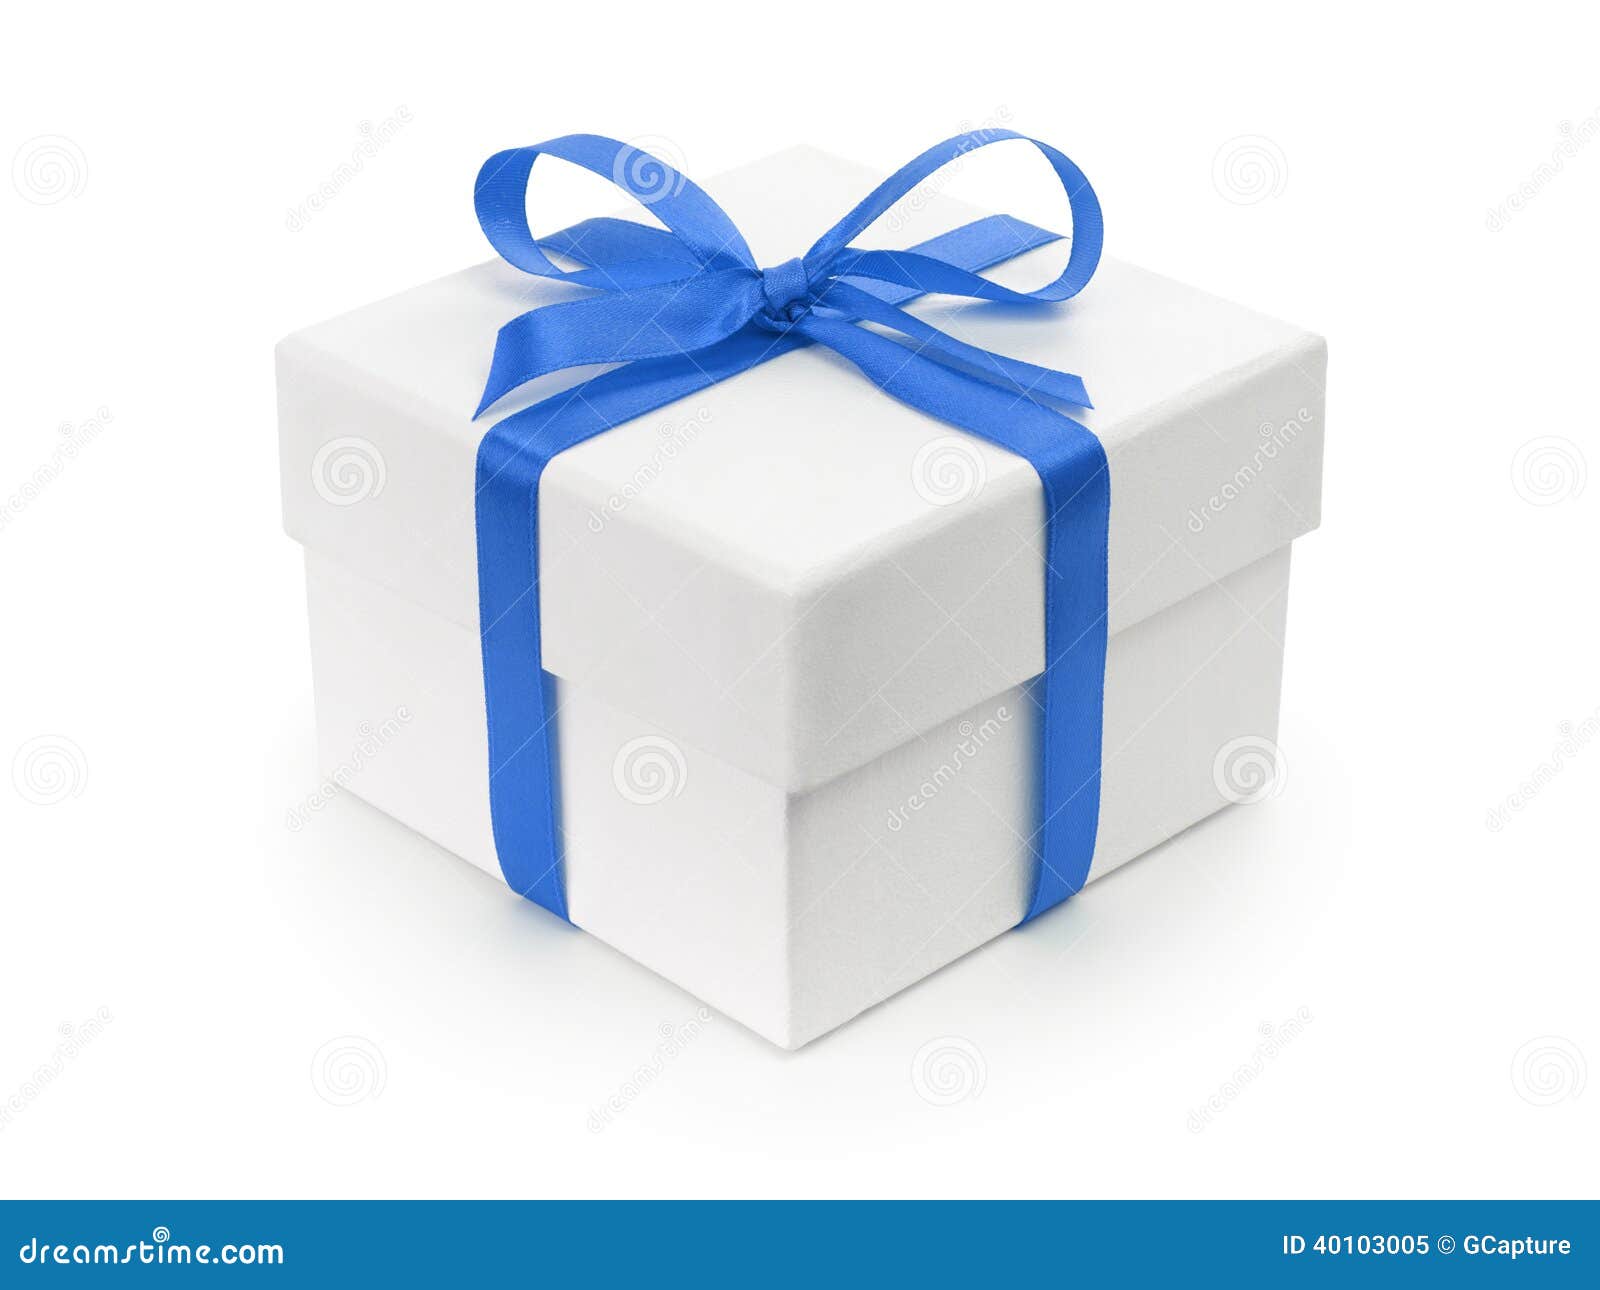 White Gift Paper Box With Blue Ribbon Bow Stock Photo - Image: 40103005